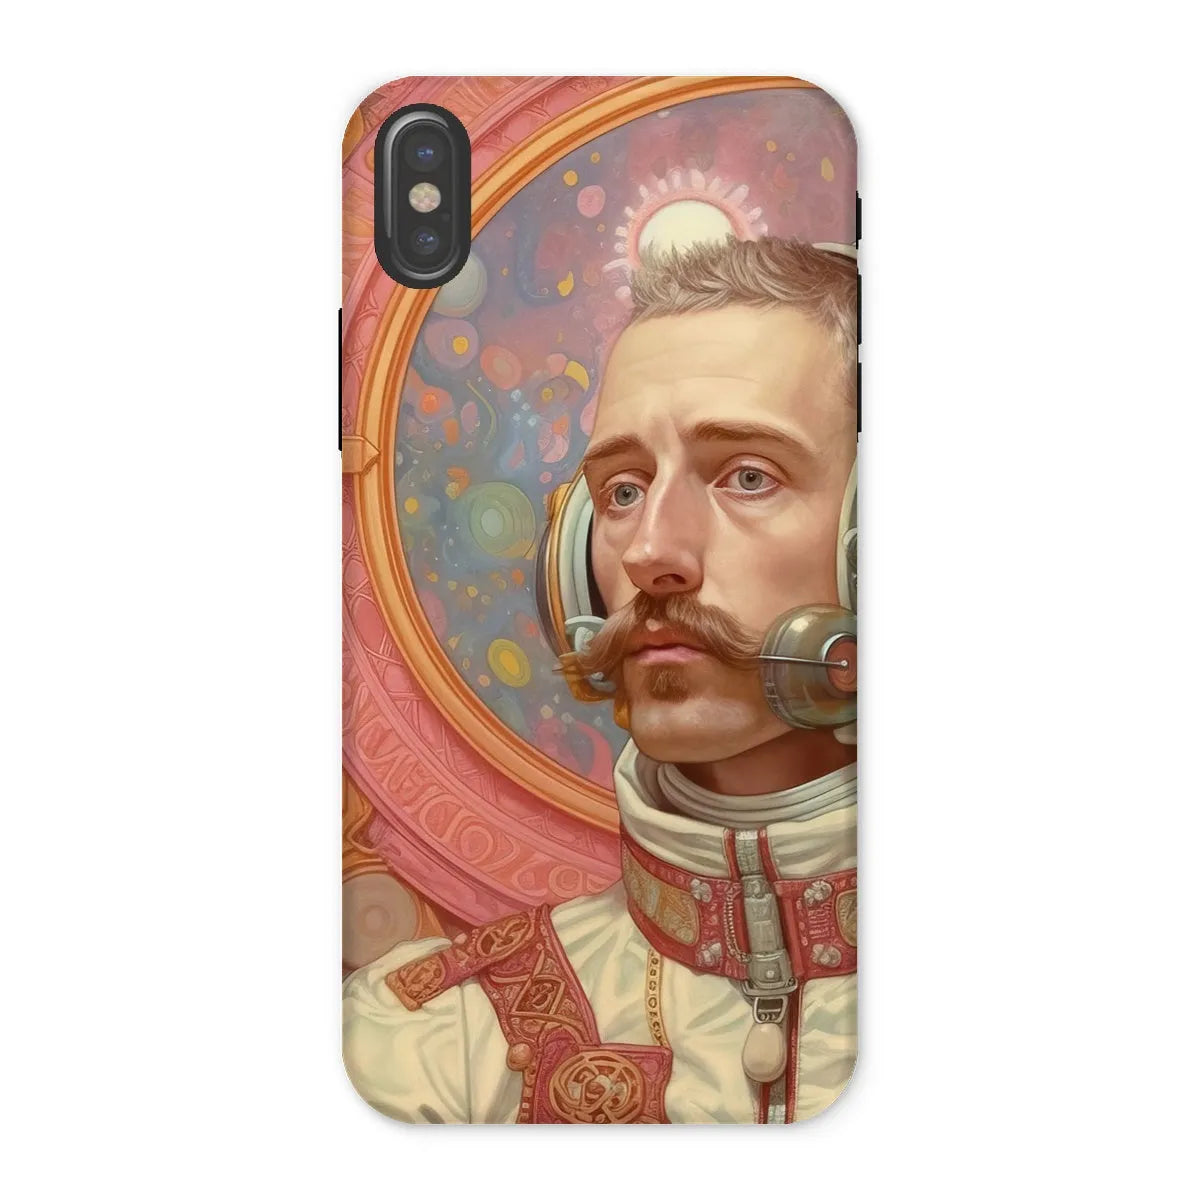 Axel The Gay Astronaut - Gay Aesthetic Art Phone Case - Iphone x / Matte - Mobile Phone Cases - Aesthetic Art